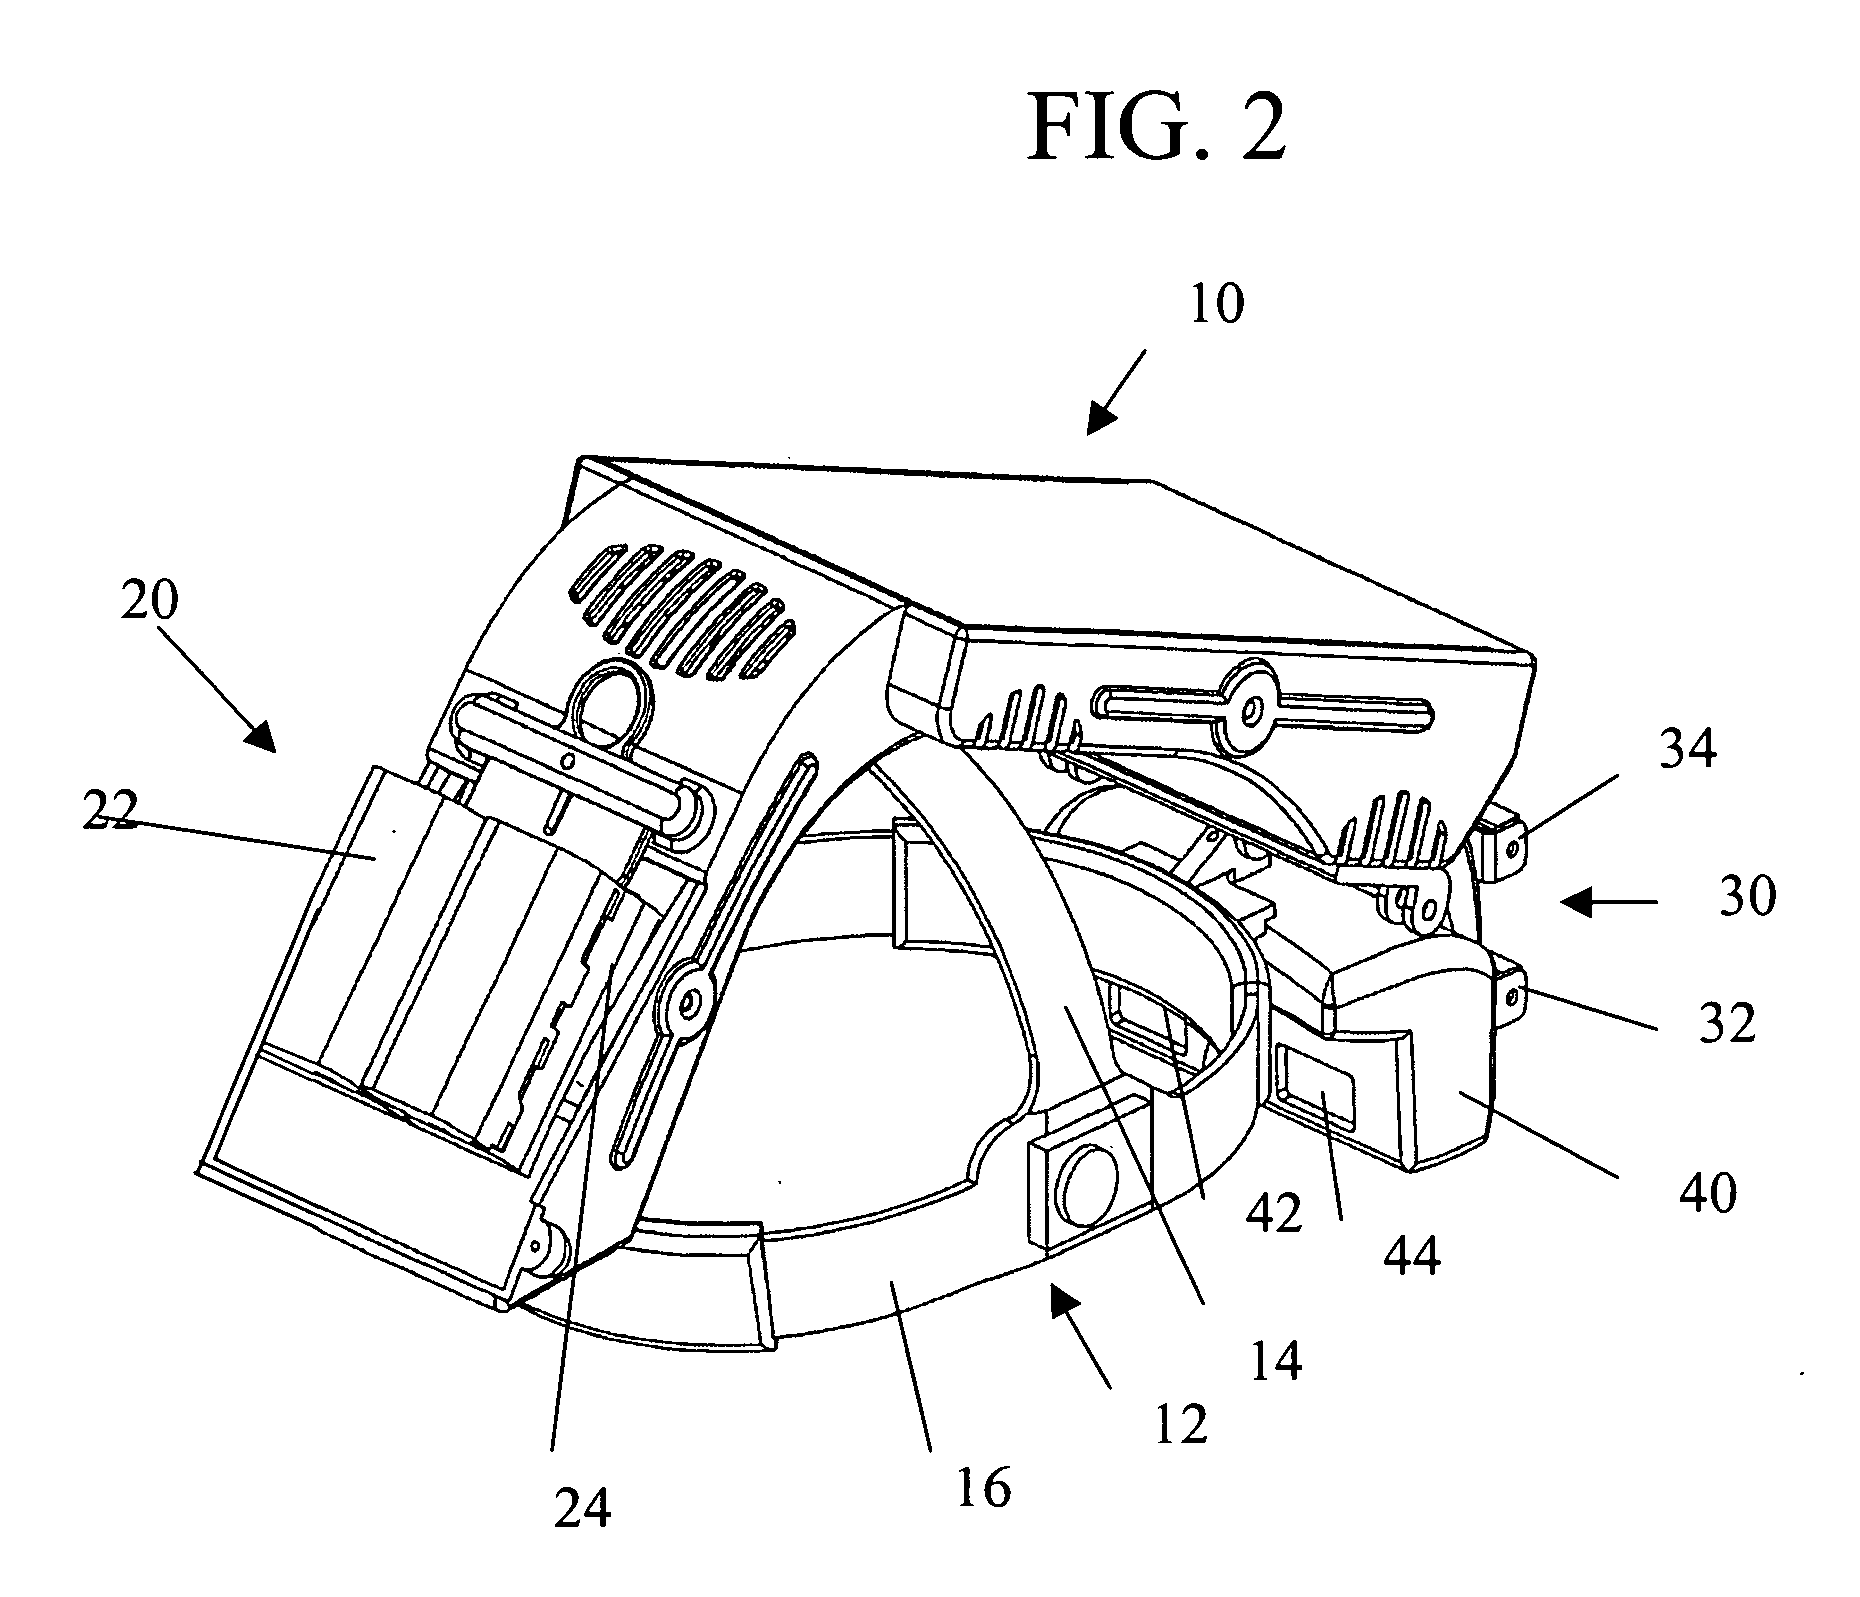 Delivery device, system, and method for delivering substances into blood vessels